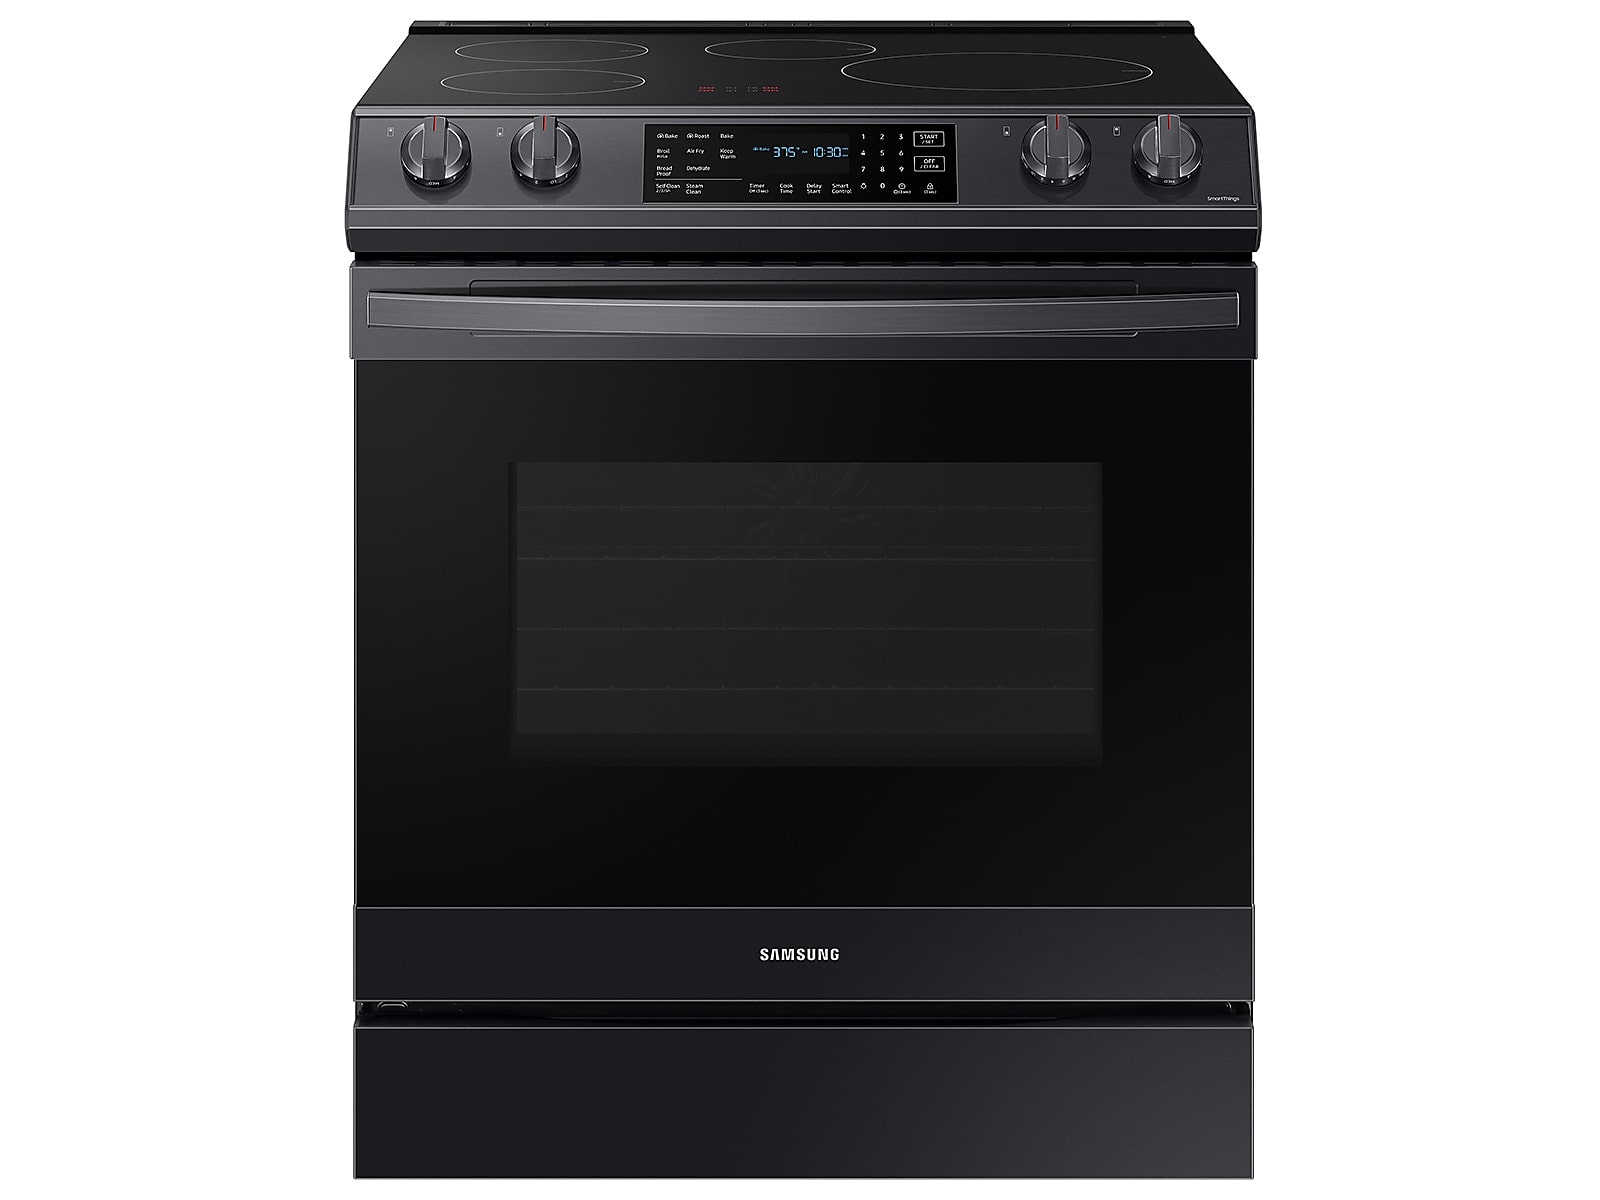 Samsung 6.3 cu. ft. Smart Rapid Heat Induction Slide-in Range with Air Fry & Convection+ in Black Stainless Steel(NE63B8611SG/AA)